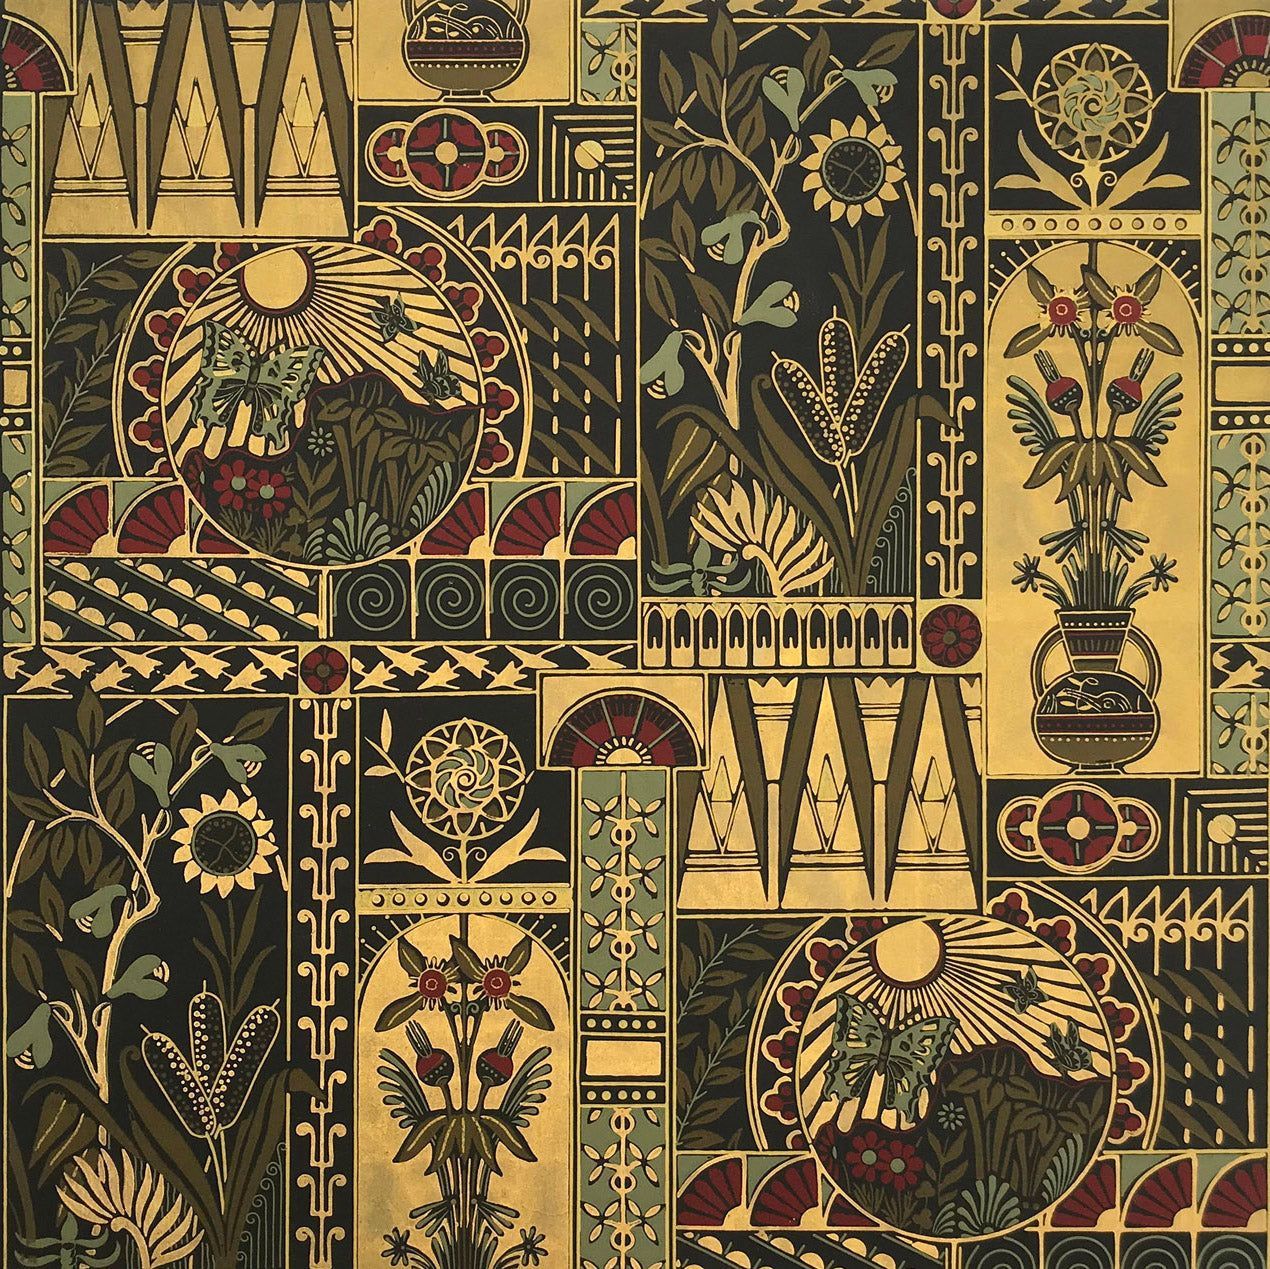 A pattern of flowers and geometric shapes - Victorian